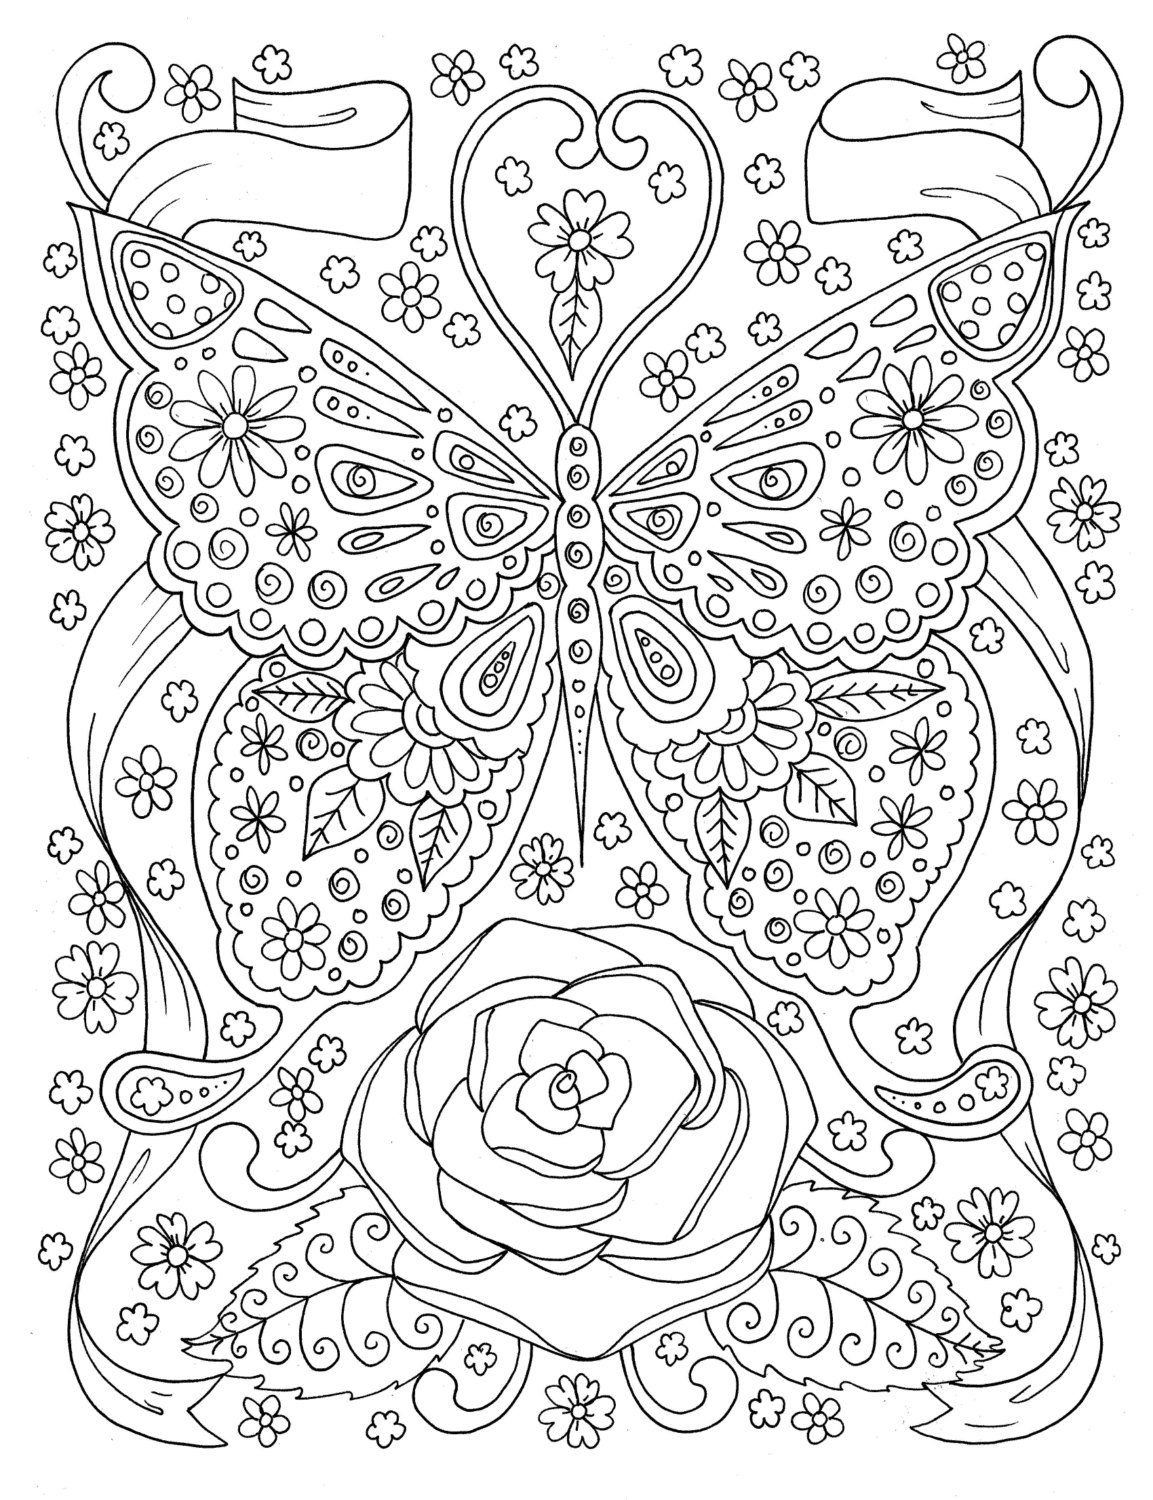  Digital Coloring Pages Free for Kids